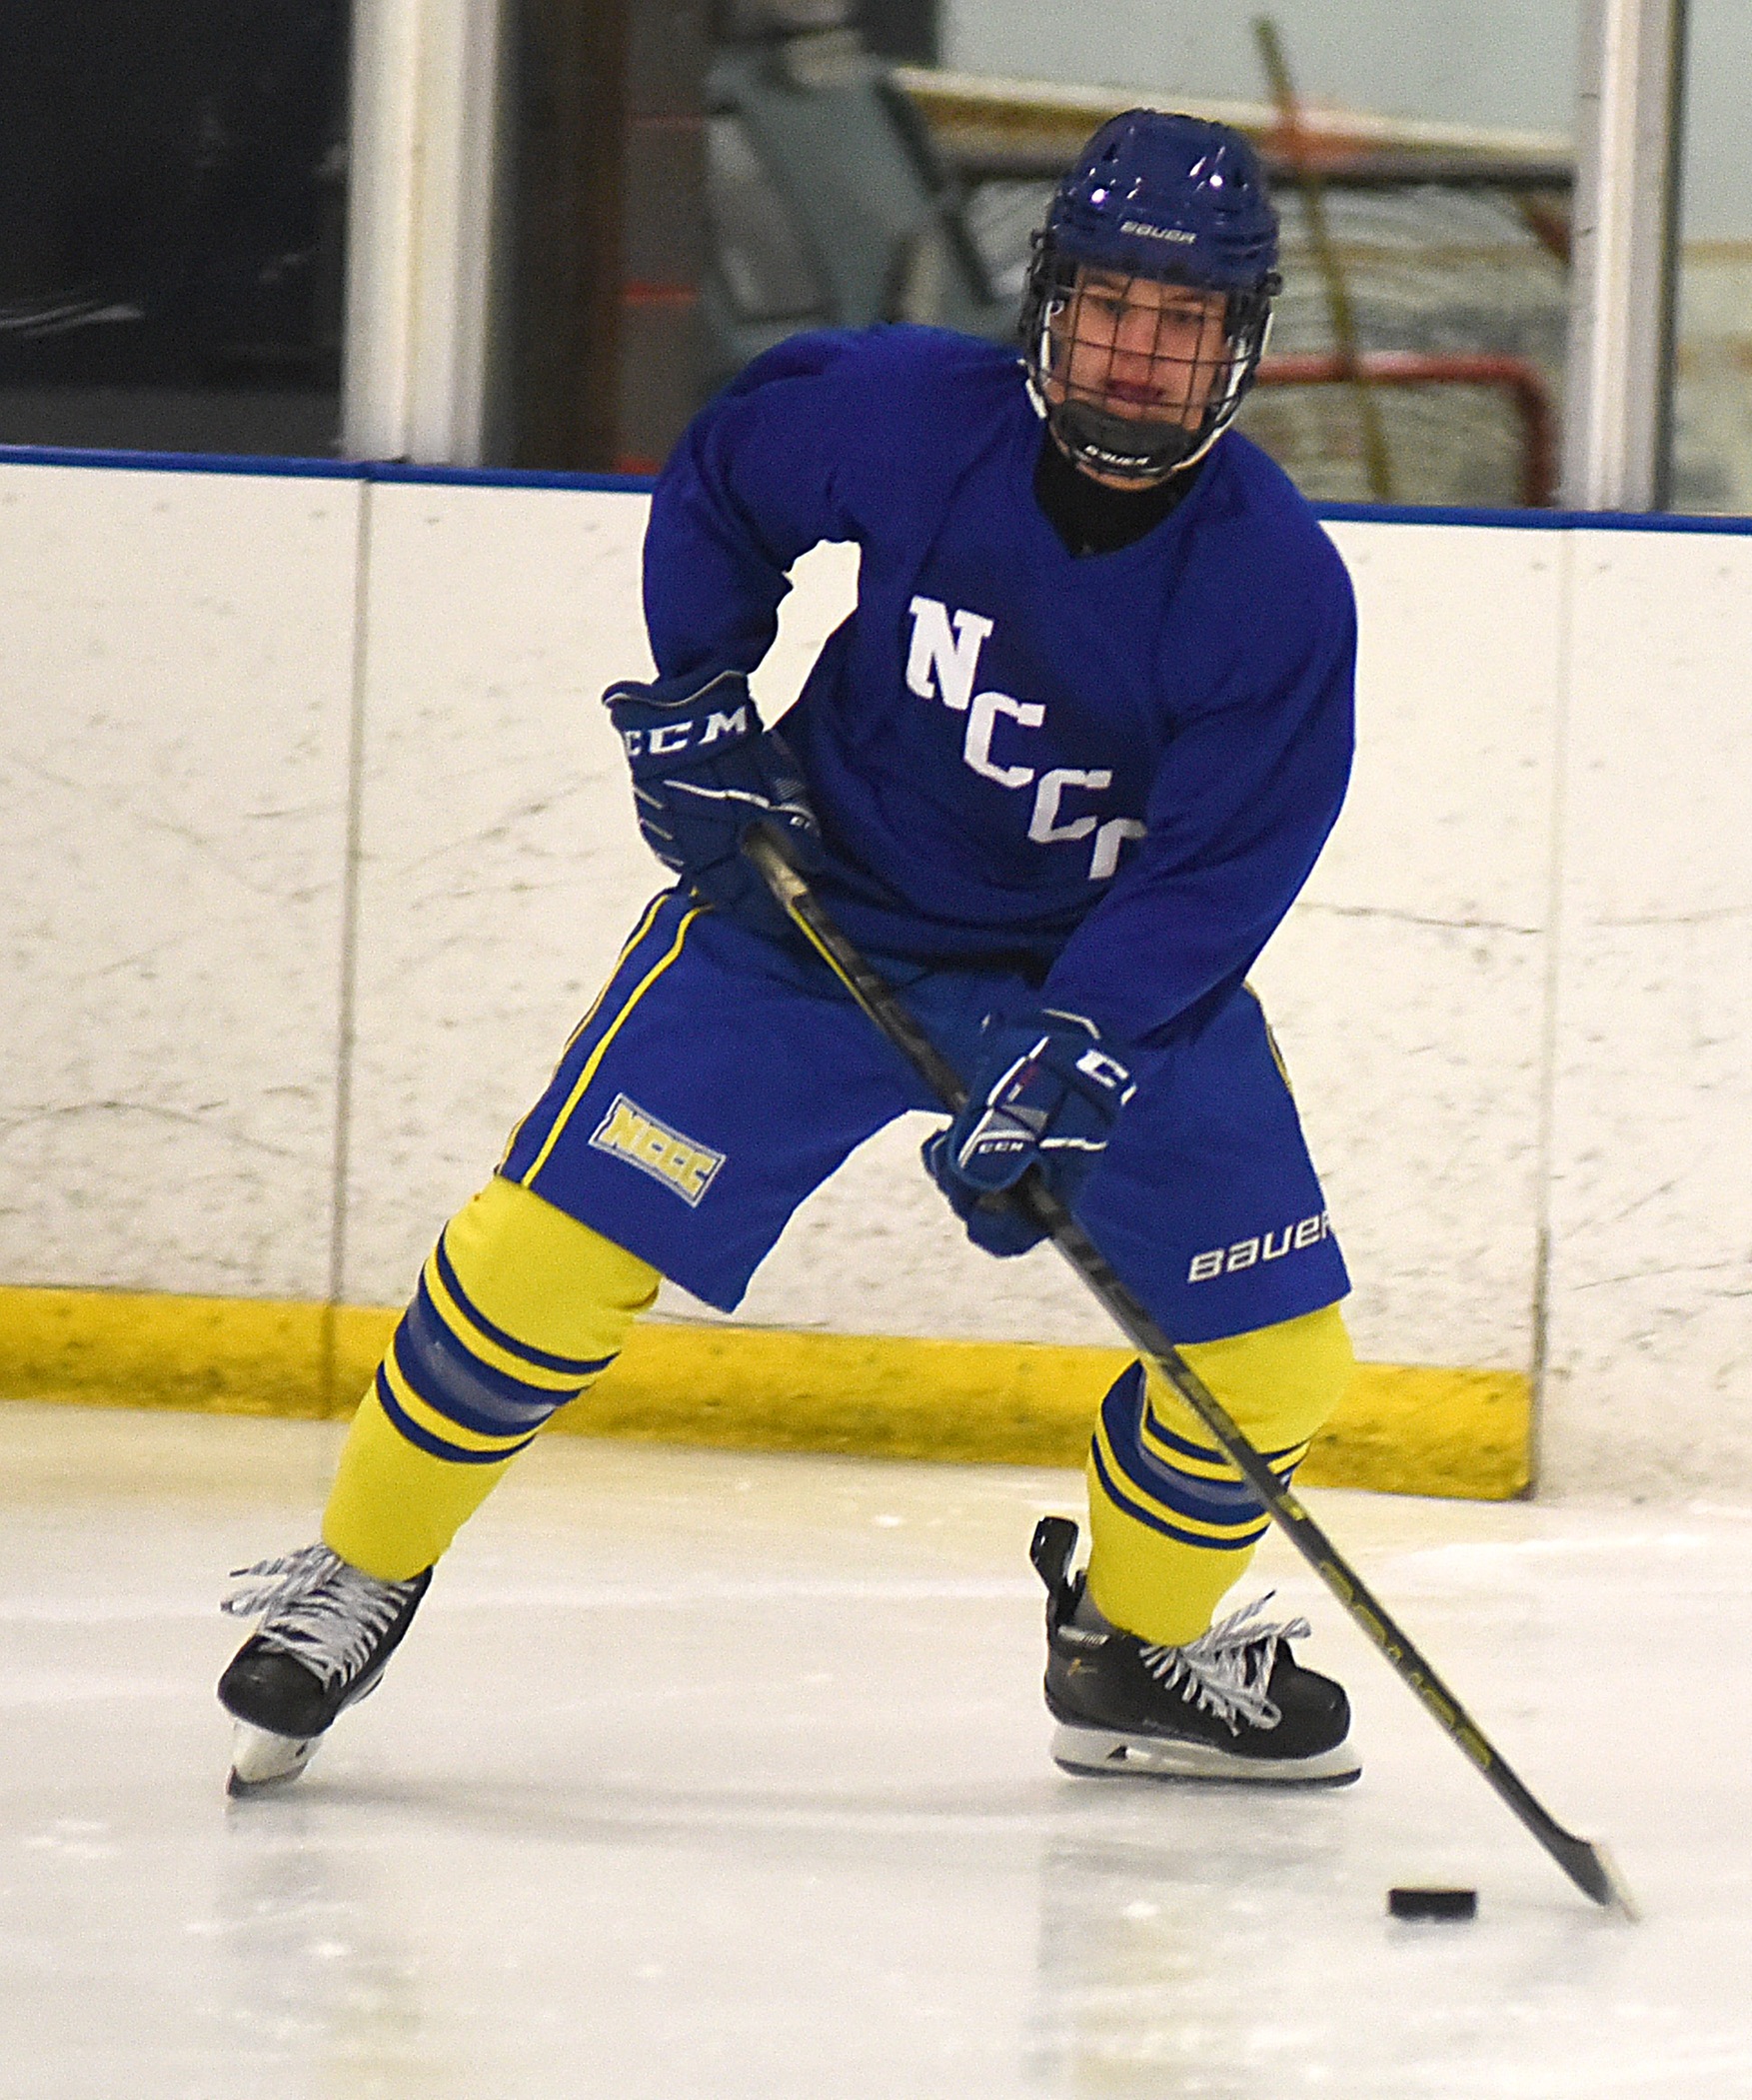 NCCC hockey earns a pair of division wins